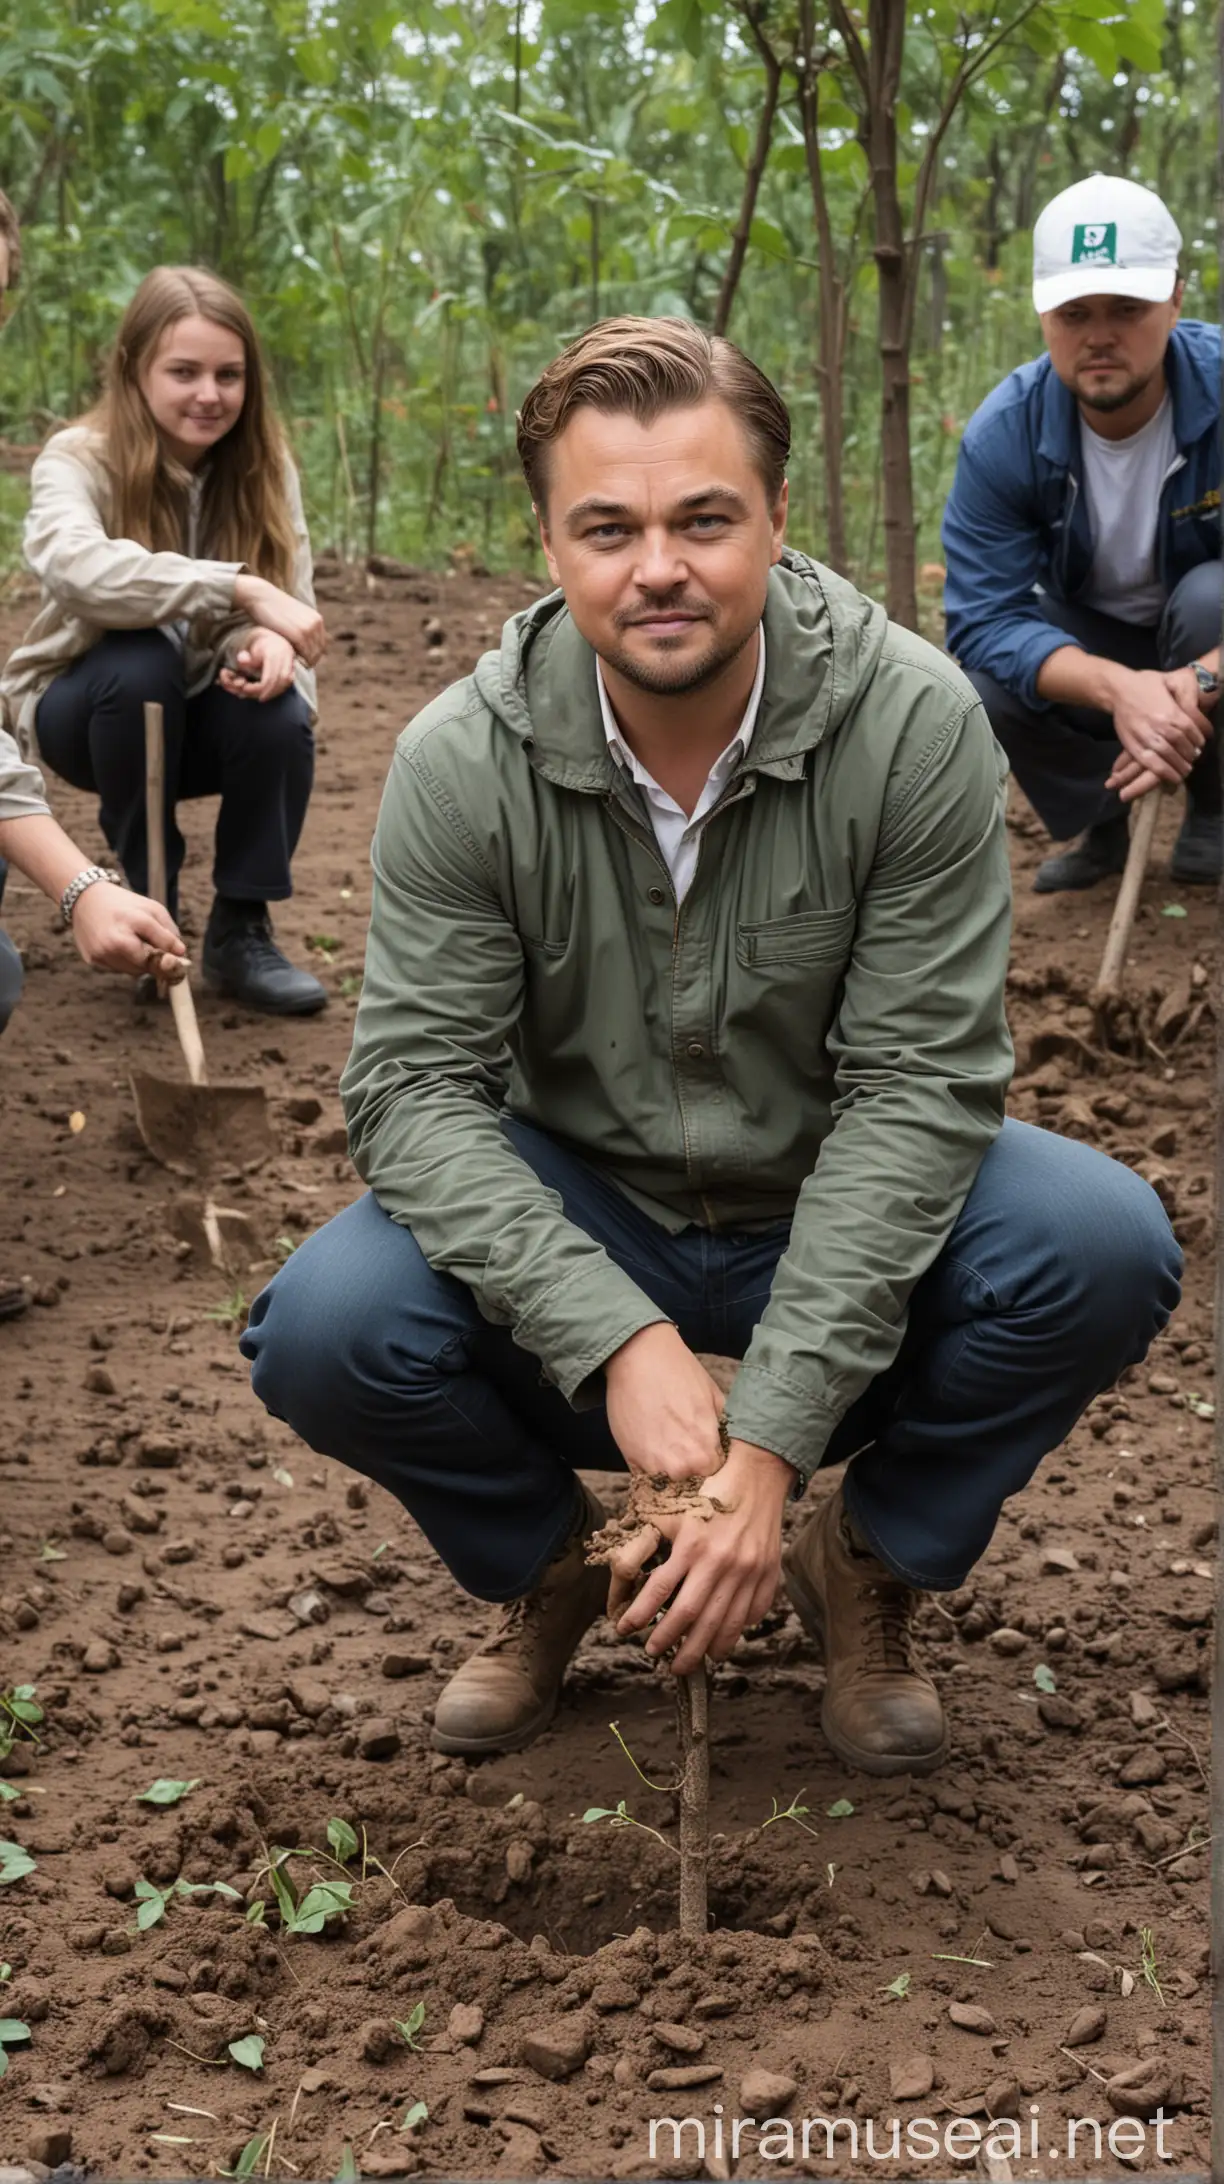 A candid shot of Leonardo DiCaprio on a environmental activism trip, kneeling in the dirt and planting a tree with a group of volunteers."
